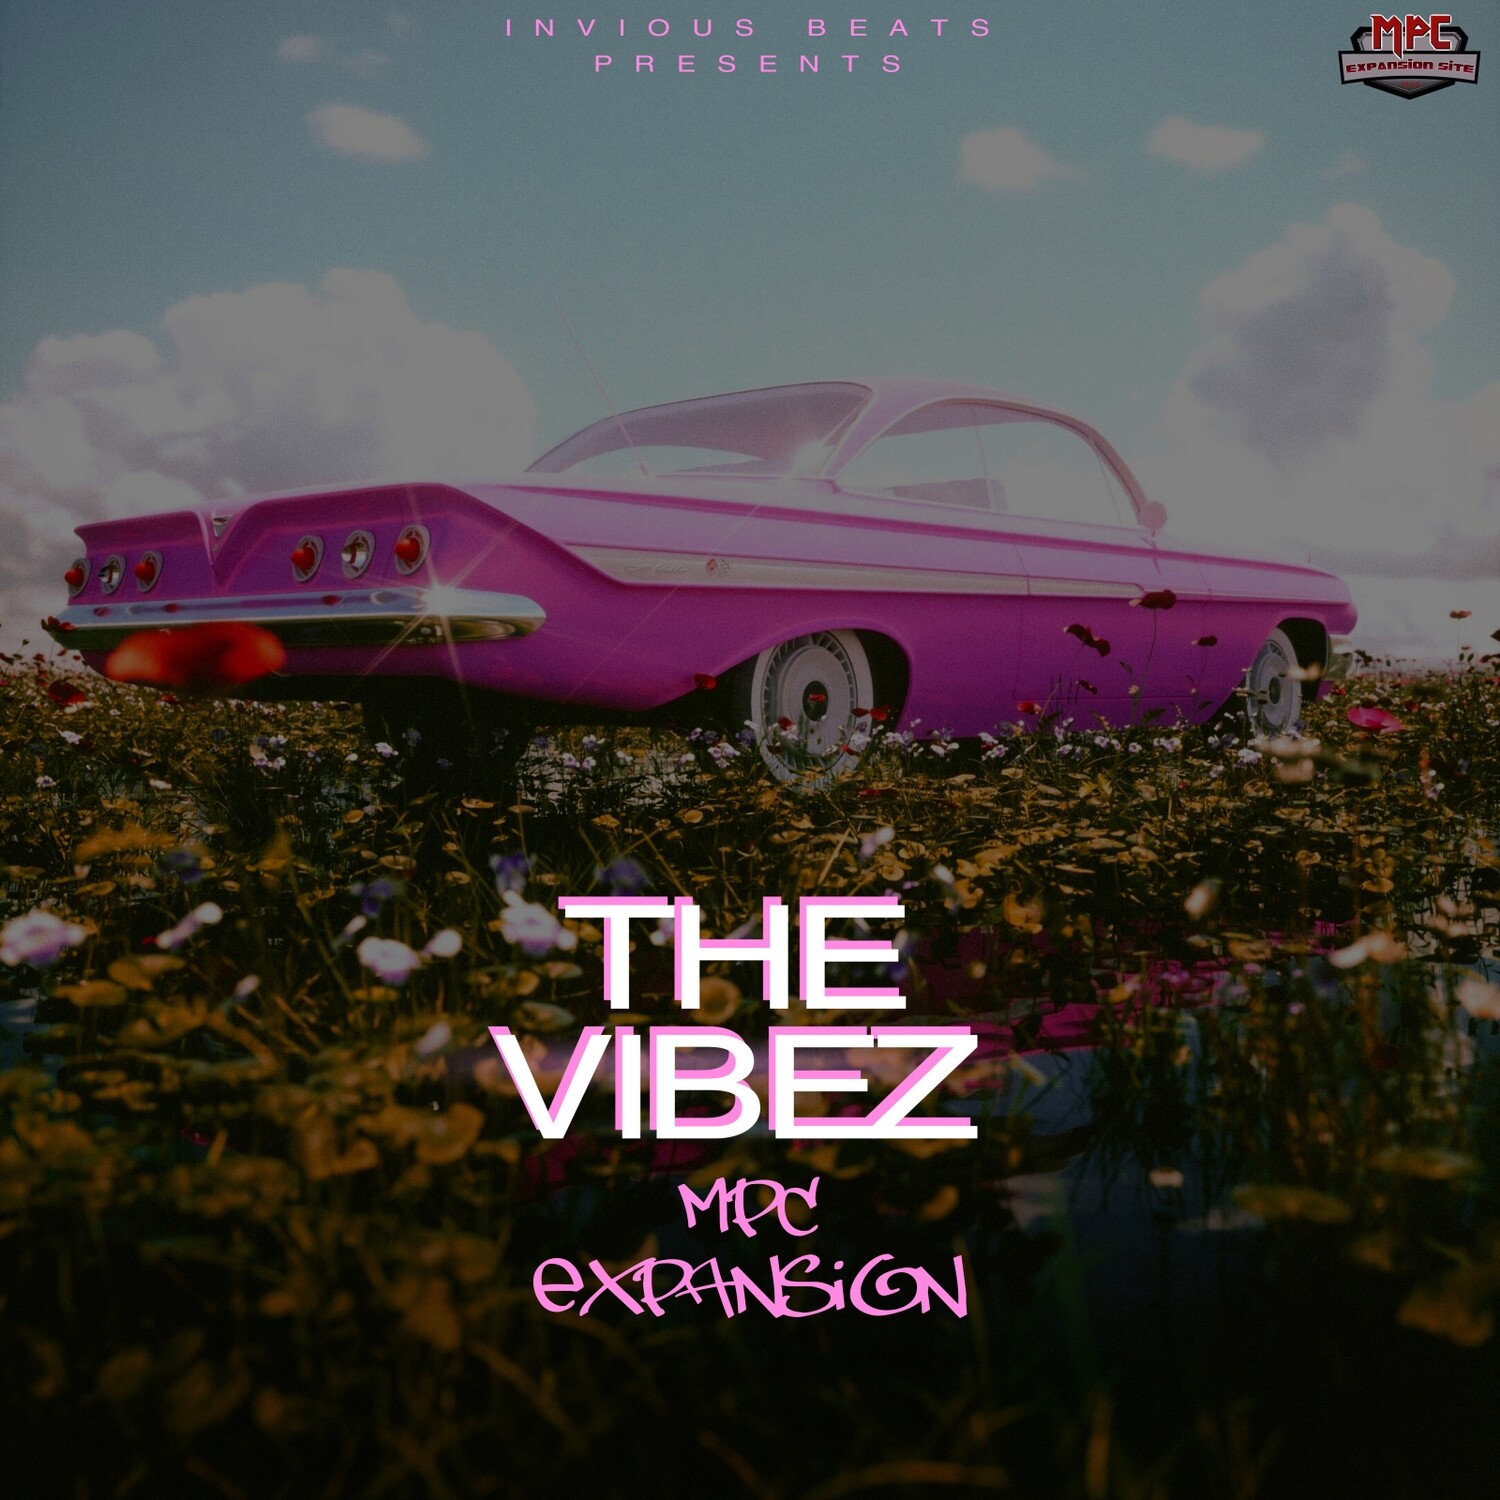 MPC EXPANSION 'THE VIBEZ' by INVIOUS